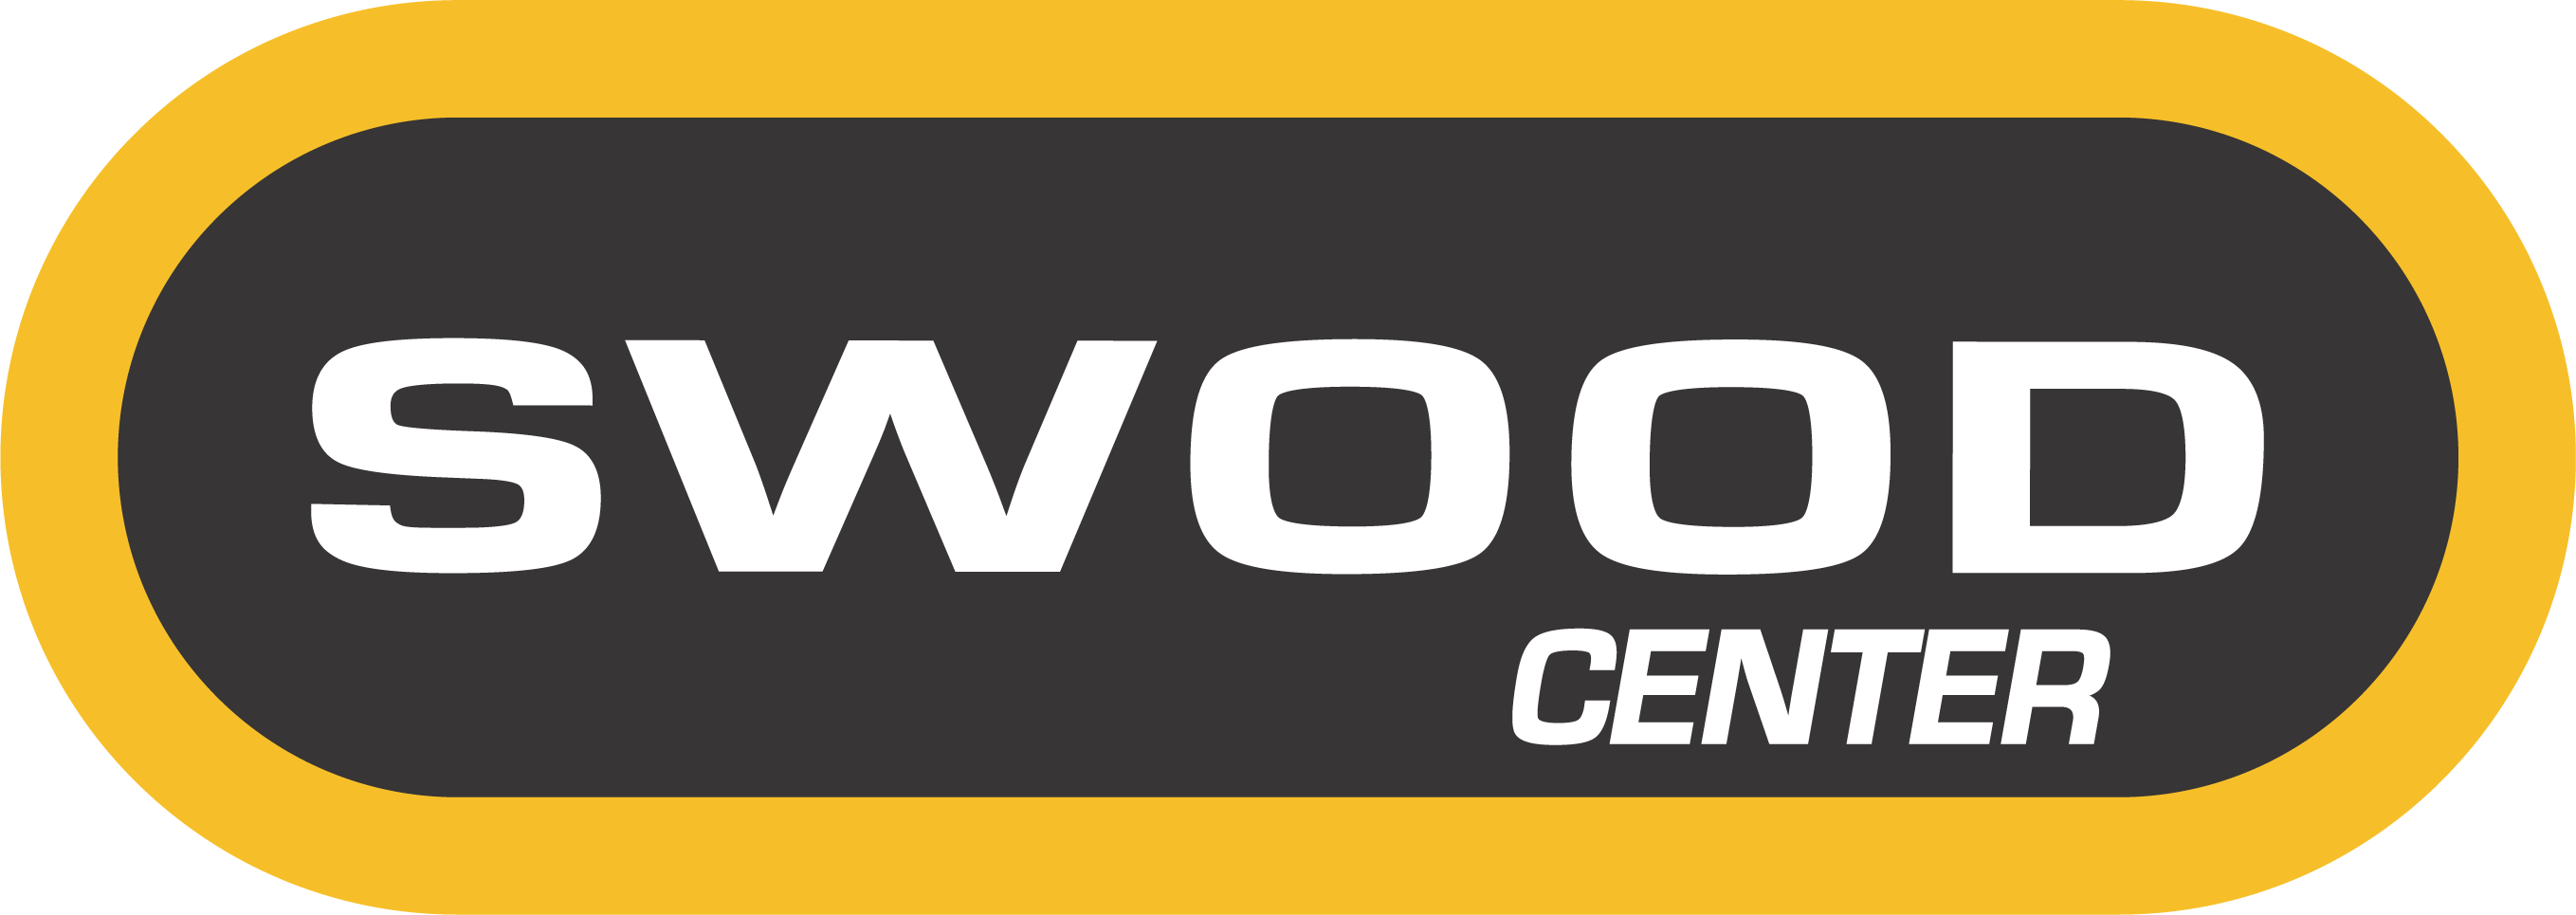 SWOOD Center for automation